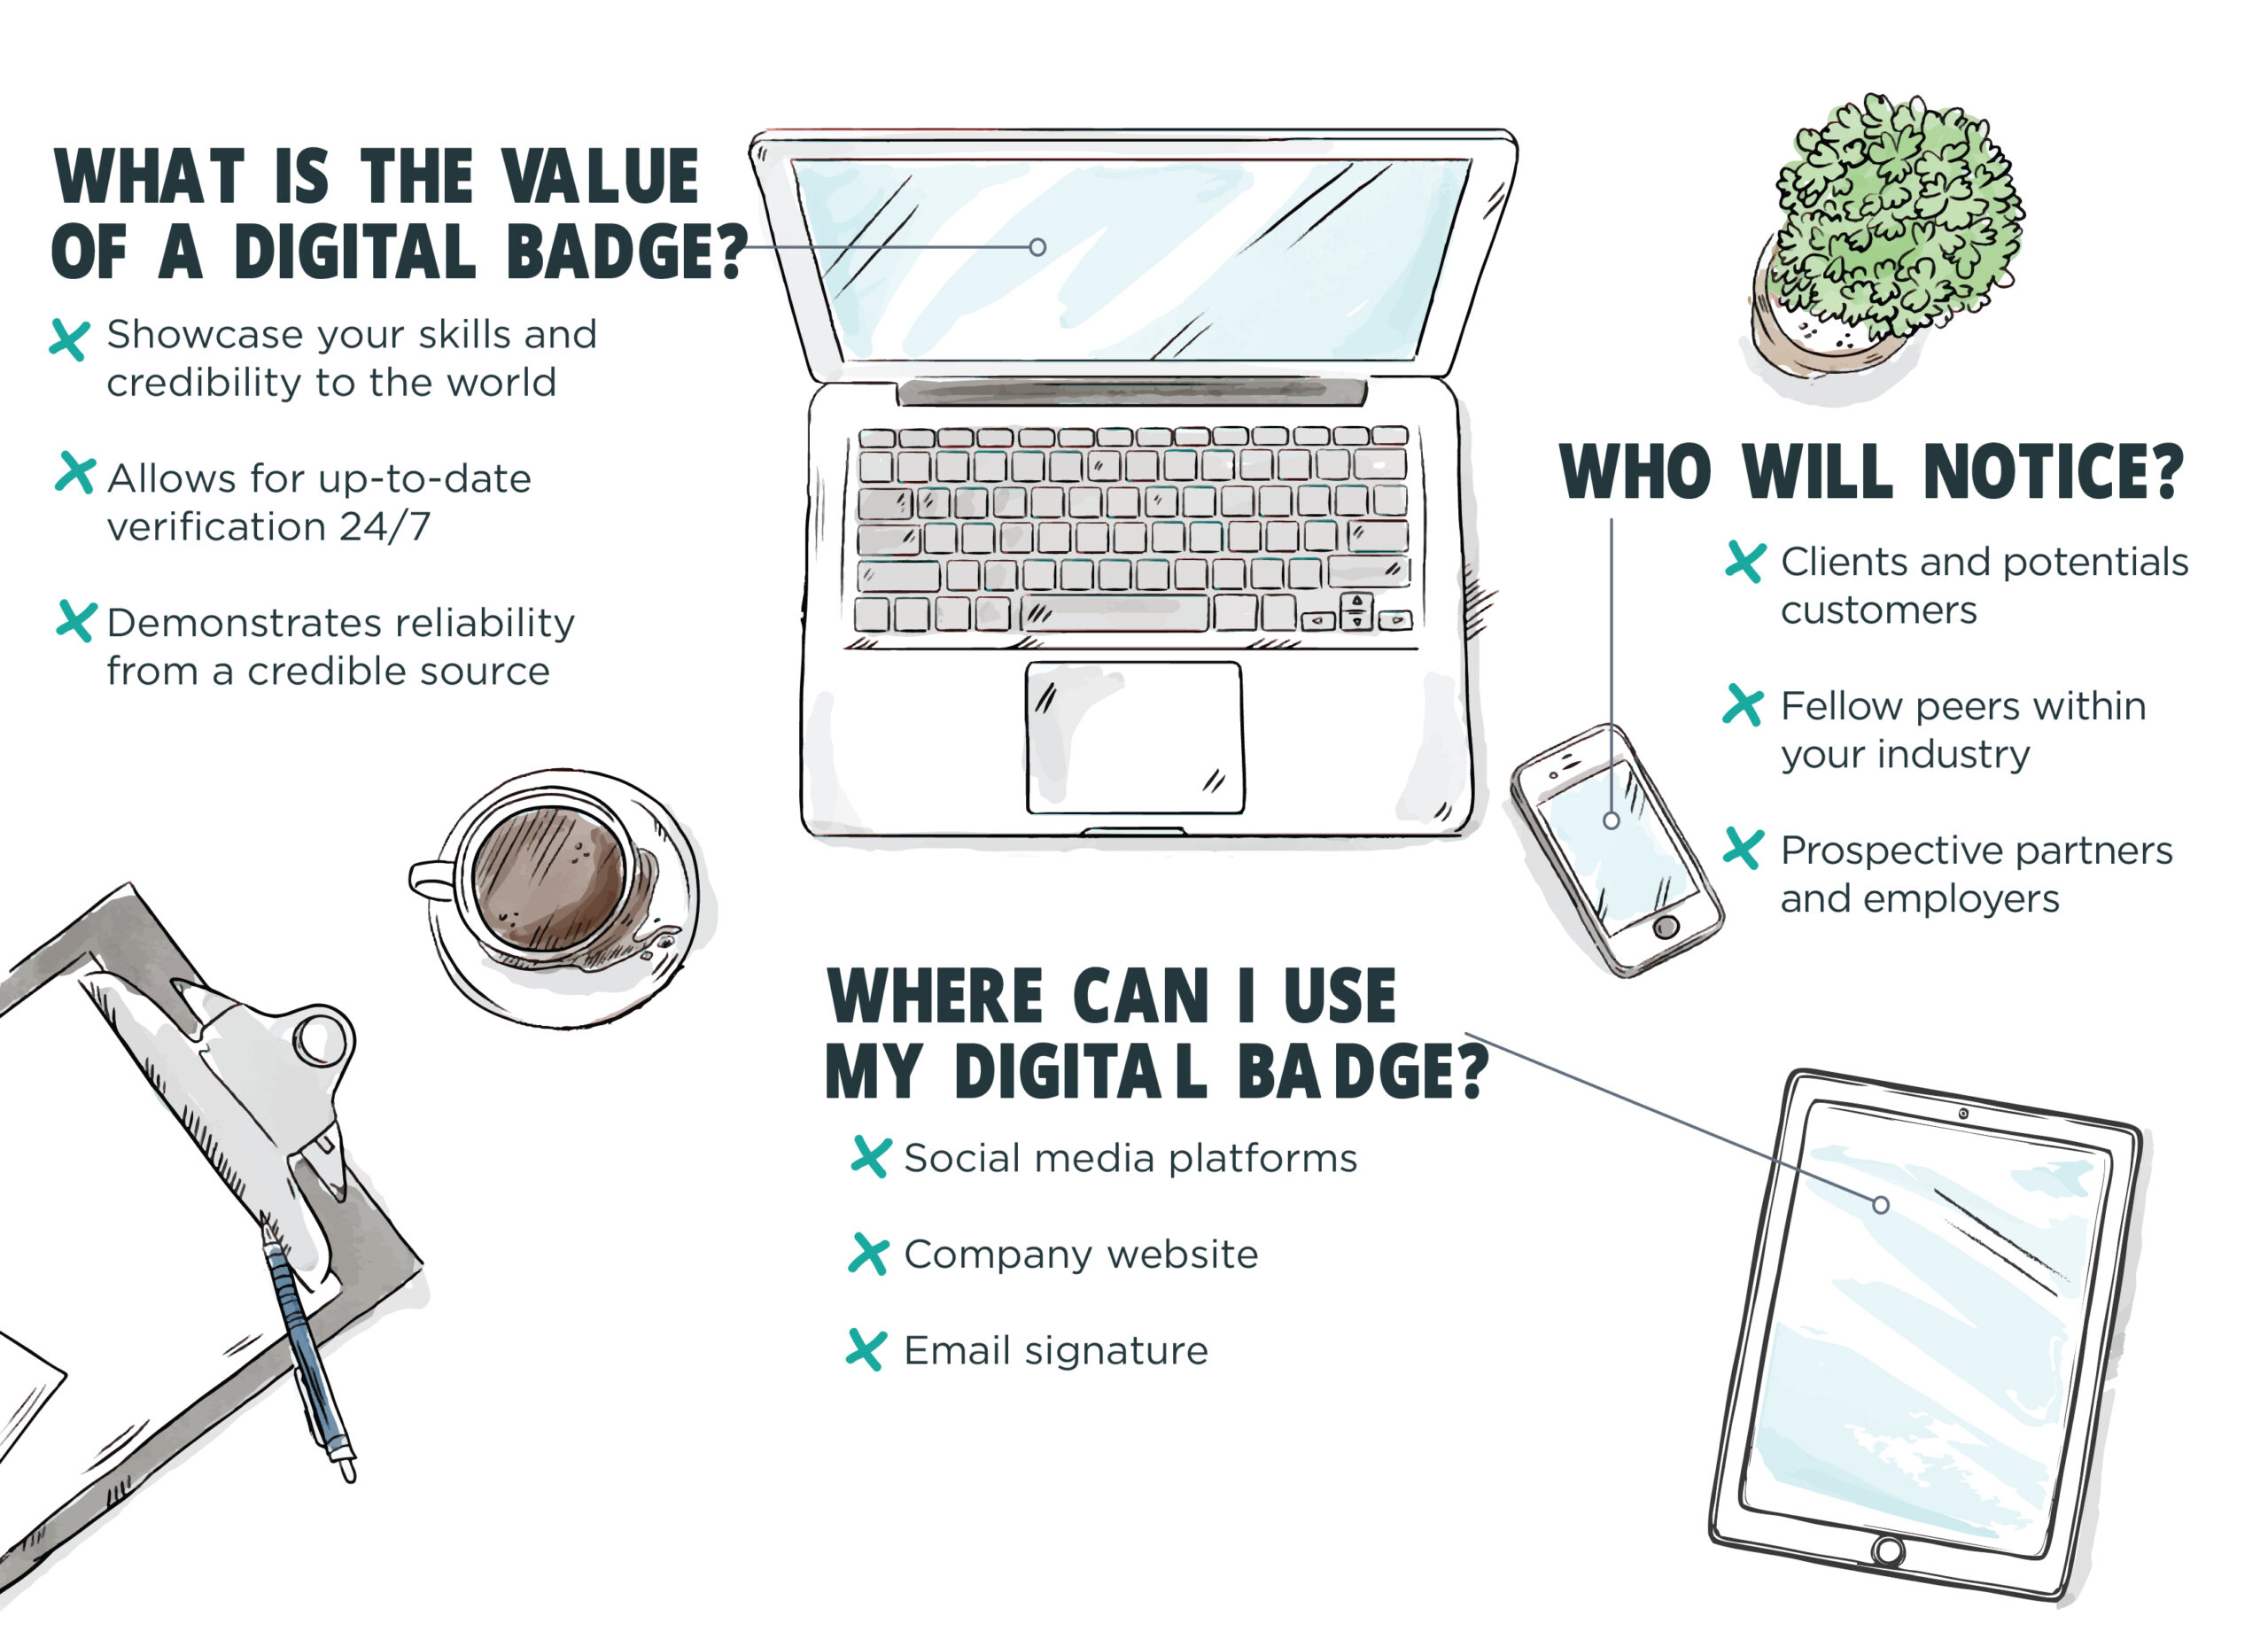 The importance of digital badges